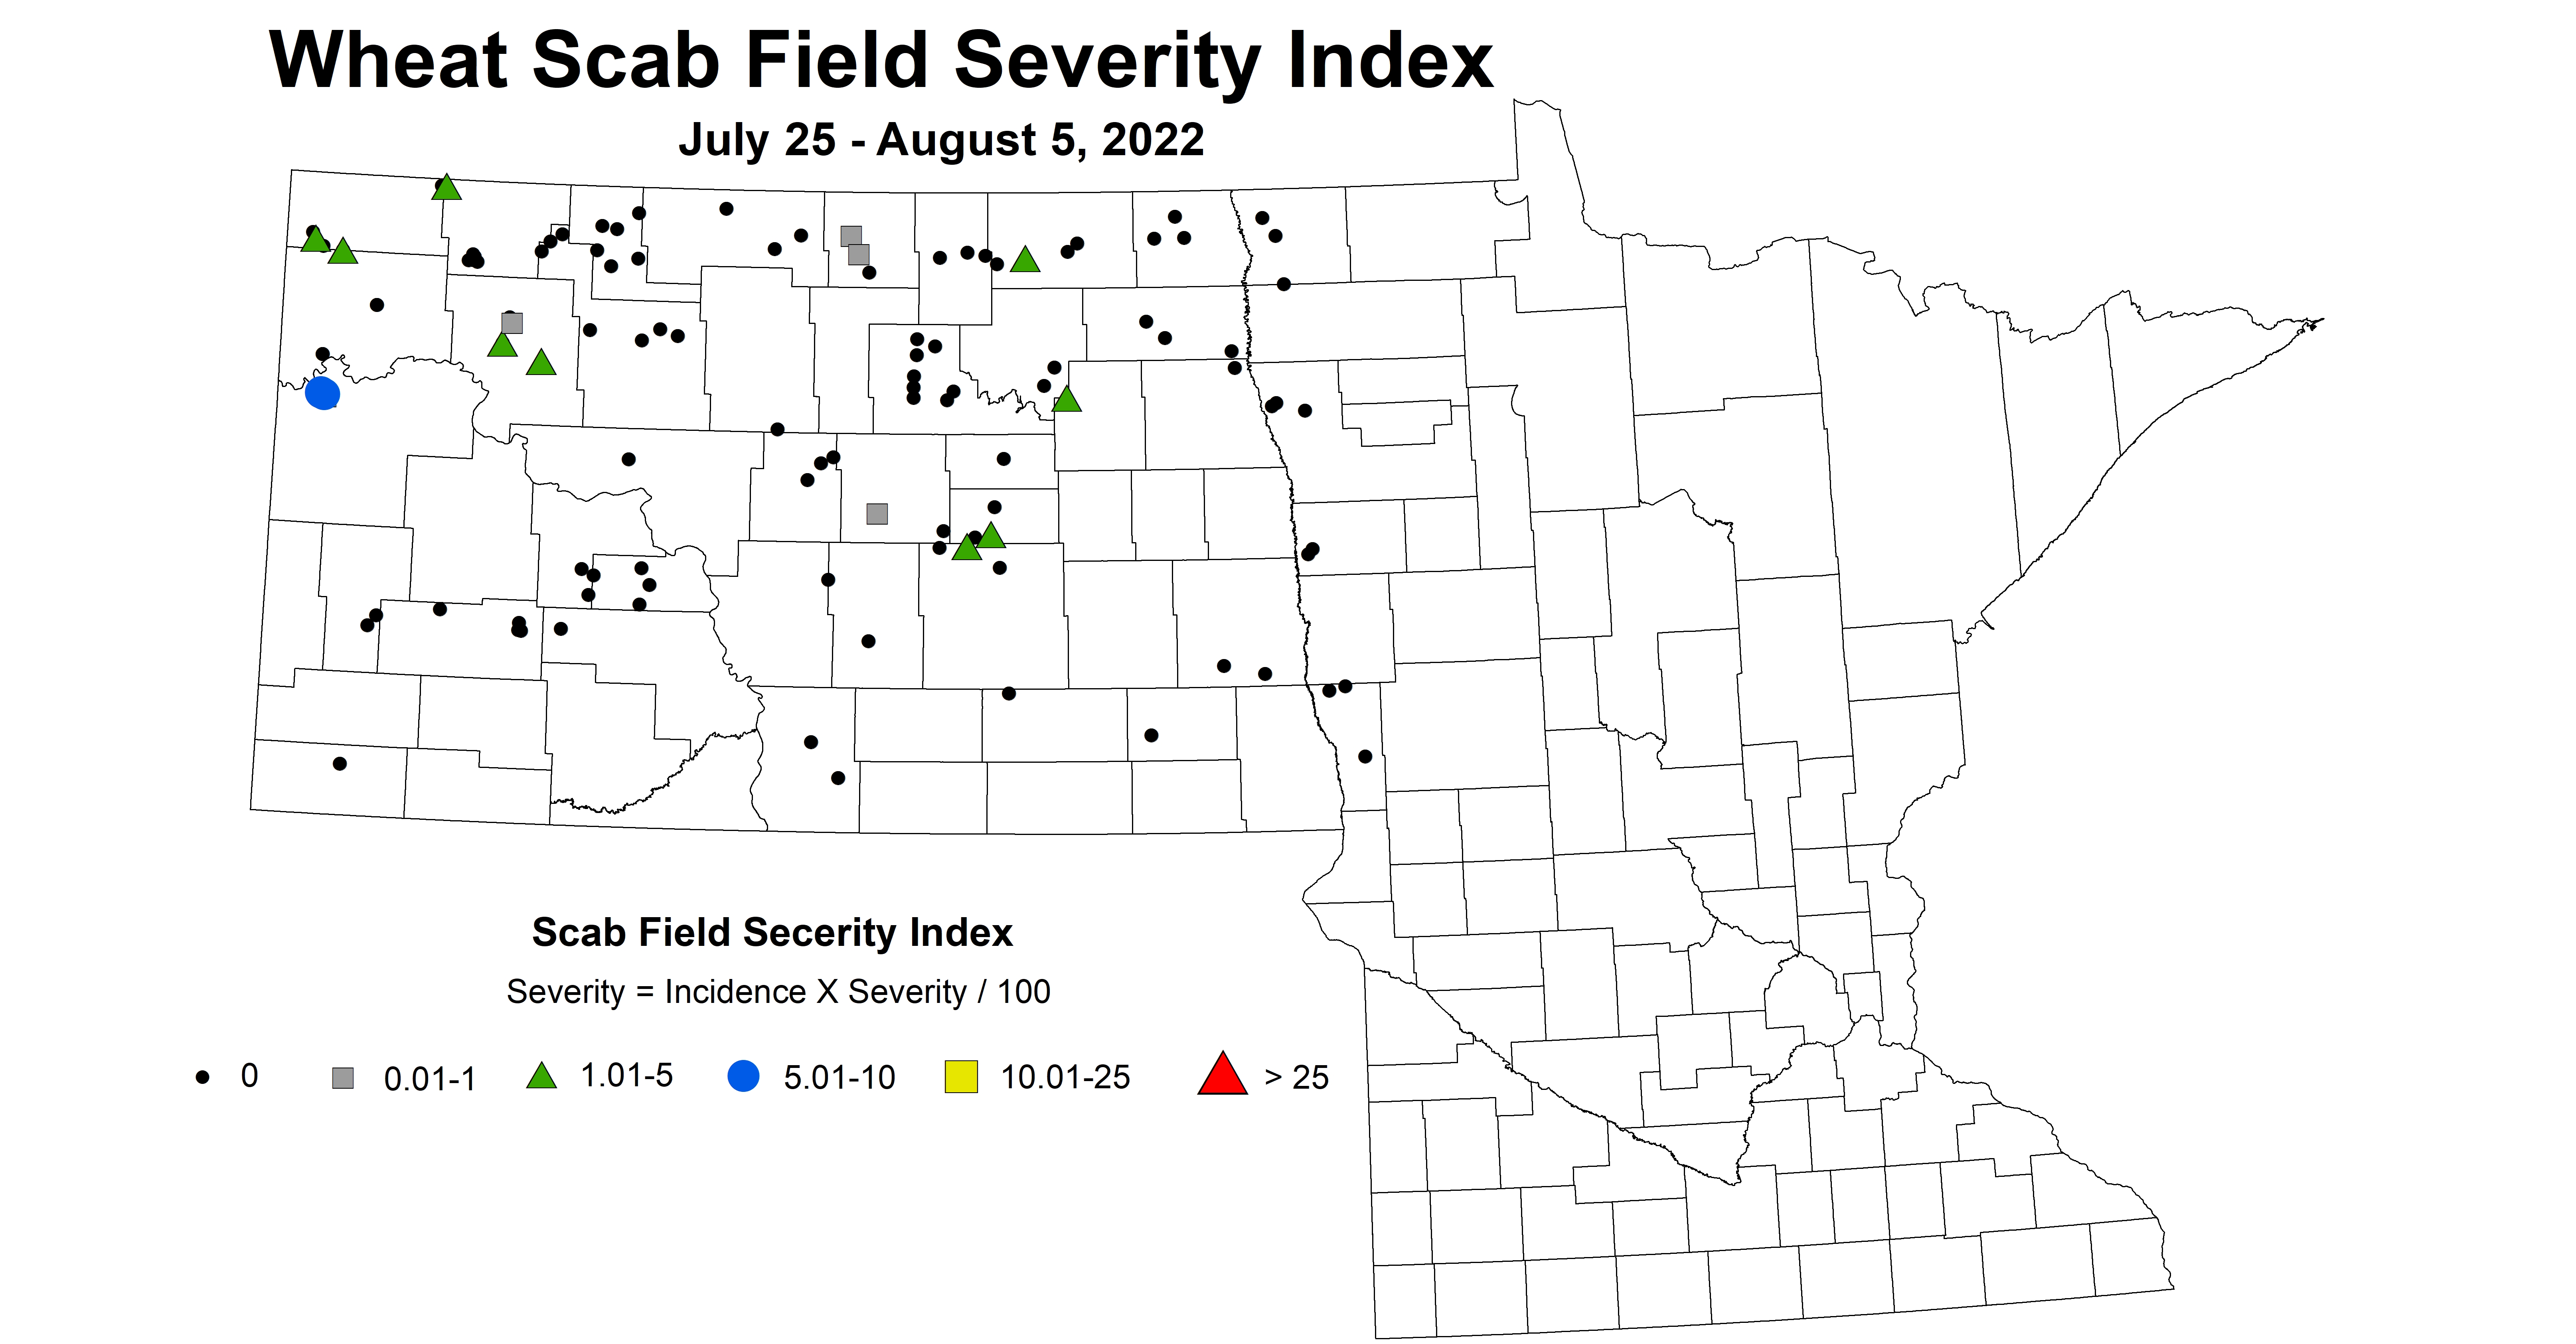 wheat scab field severity index 2022 7.25-8.5